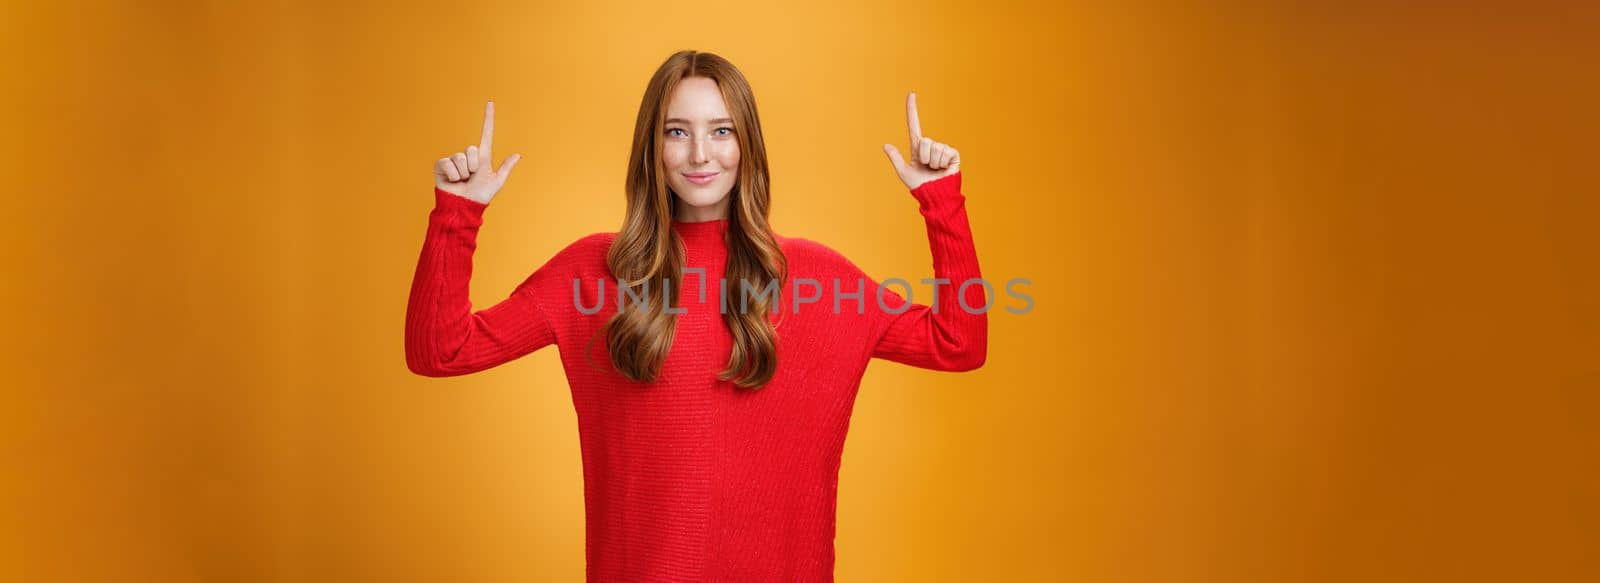 Look up you not regret it. Portrait of confident and stylish young redhead woman in 20s wearing knitted red dress pointing upwards and smiling assertive with self-assured grin over orange background.